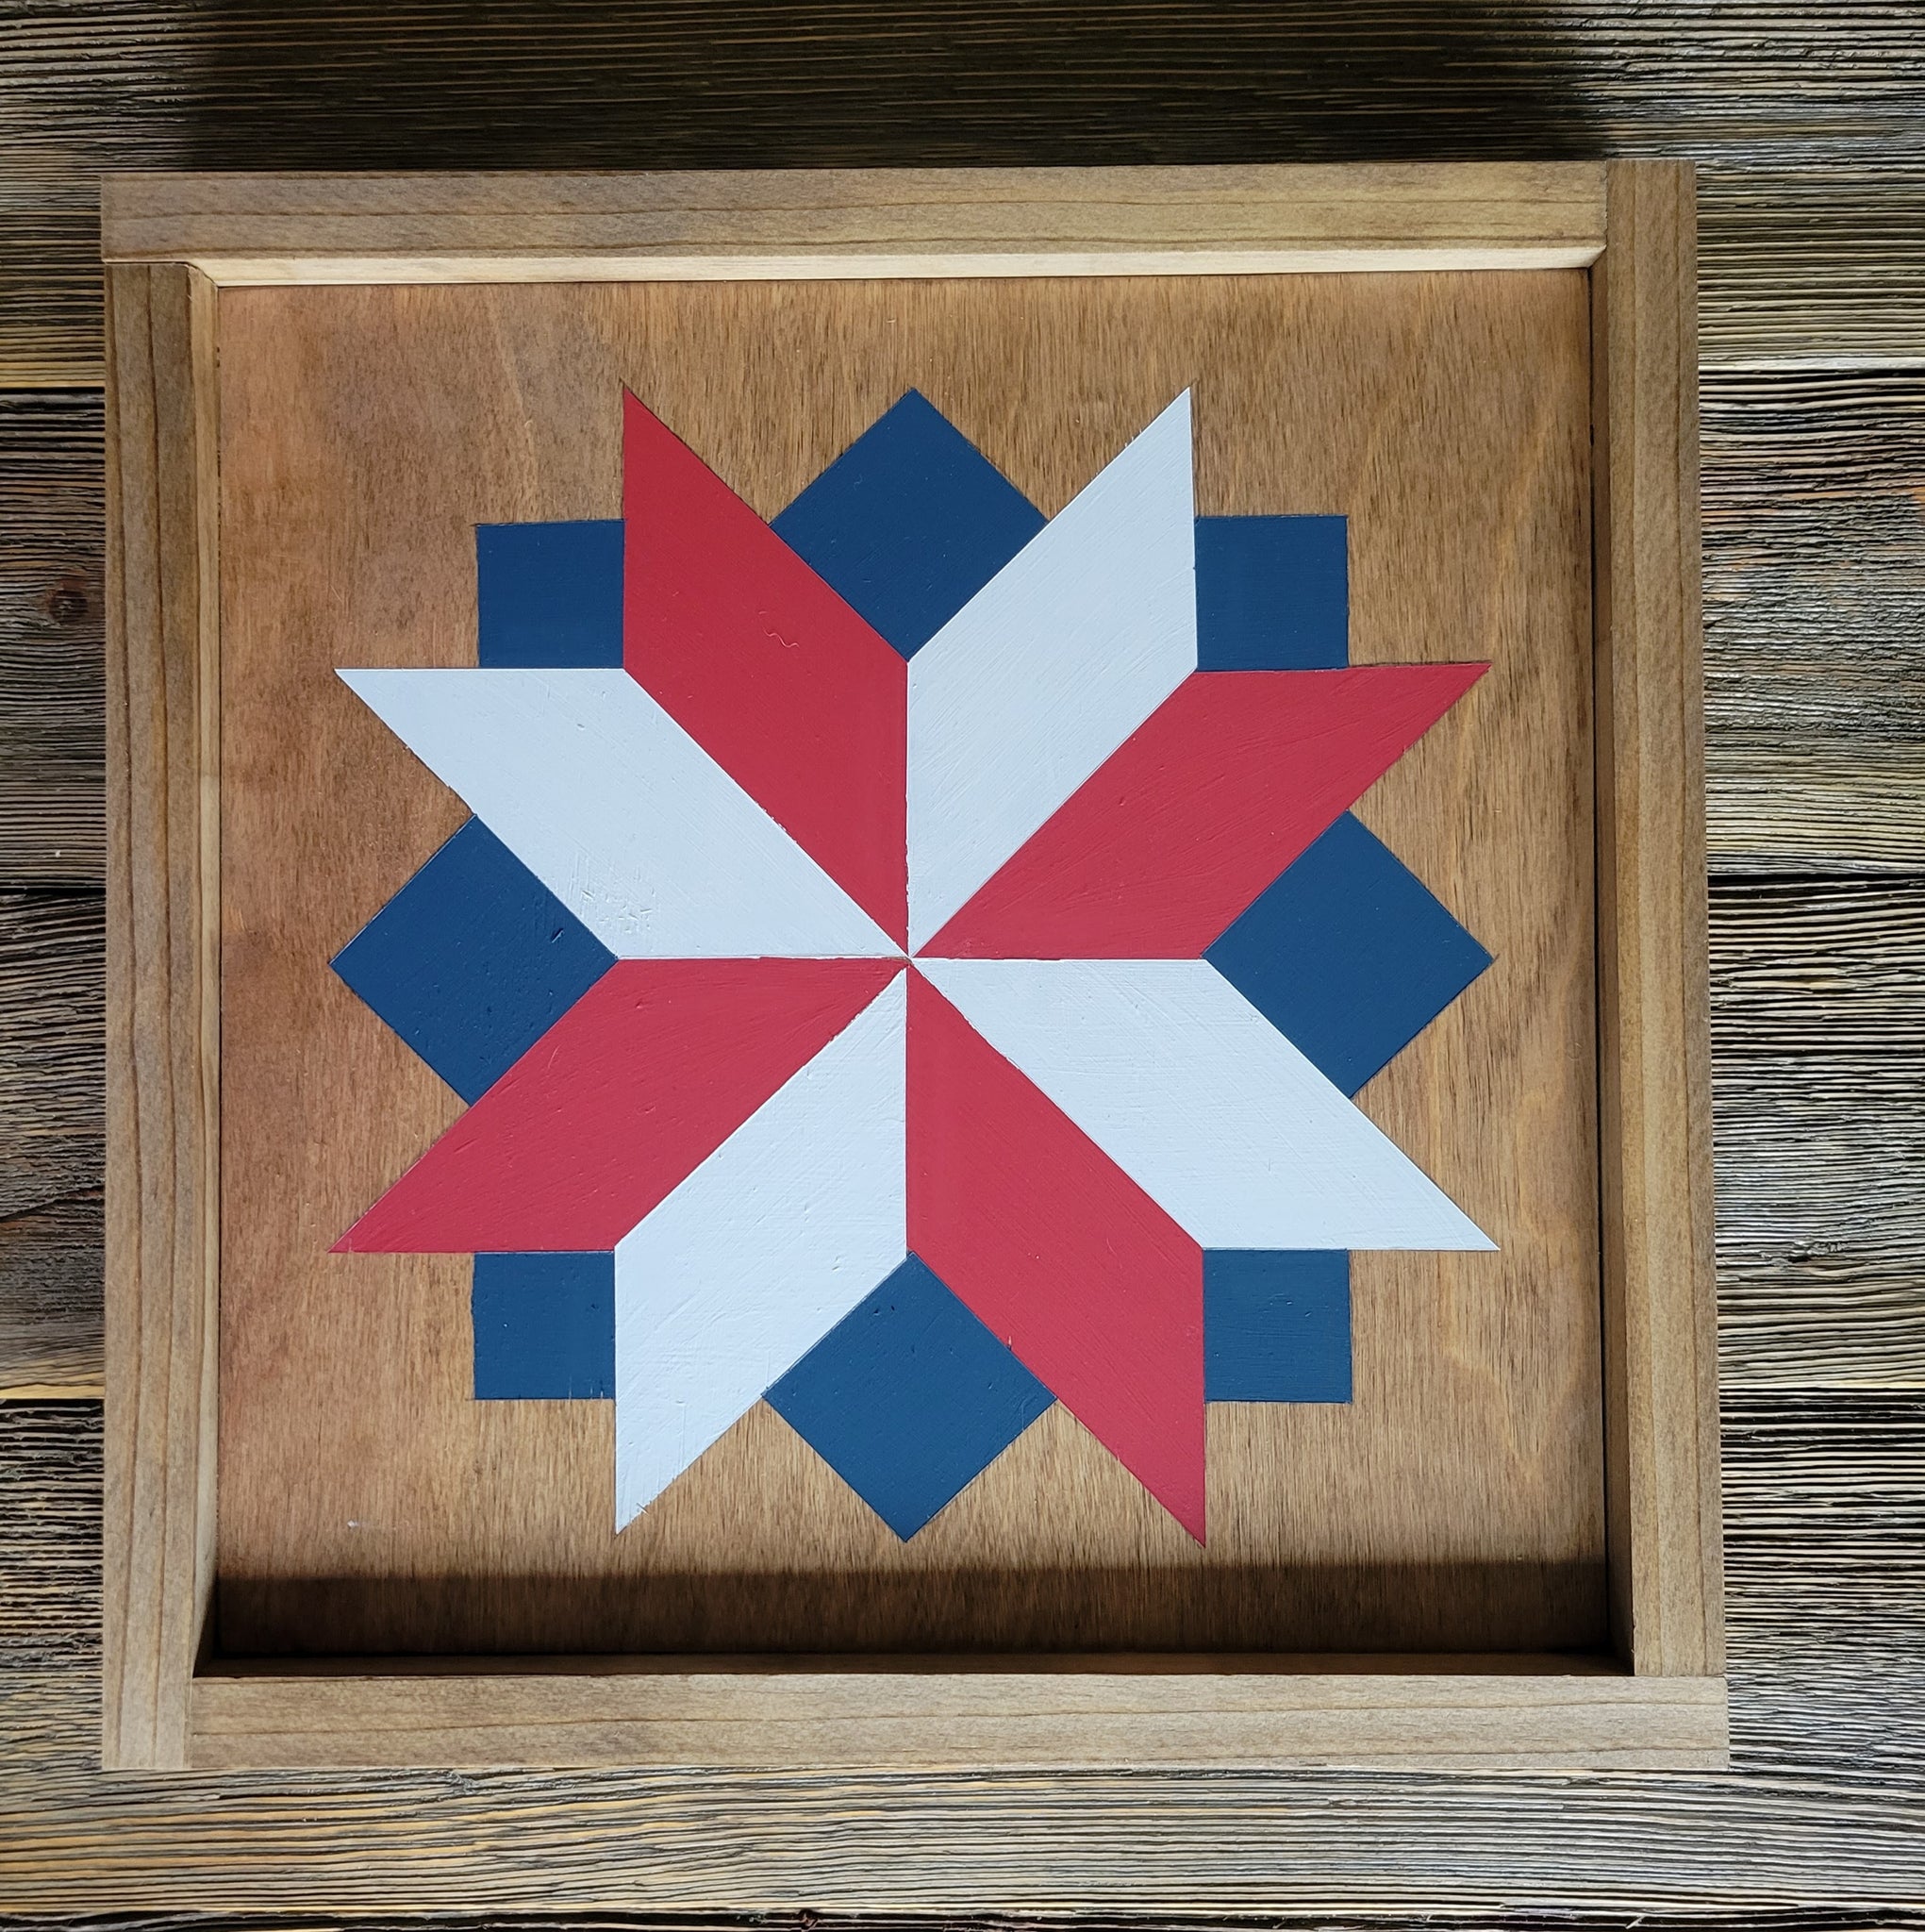 a barn quilt laying on the wooden floor
american flag colors as stars